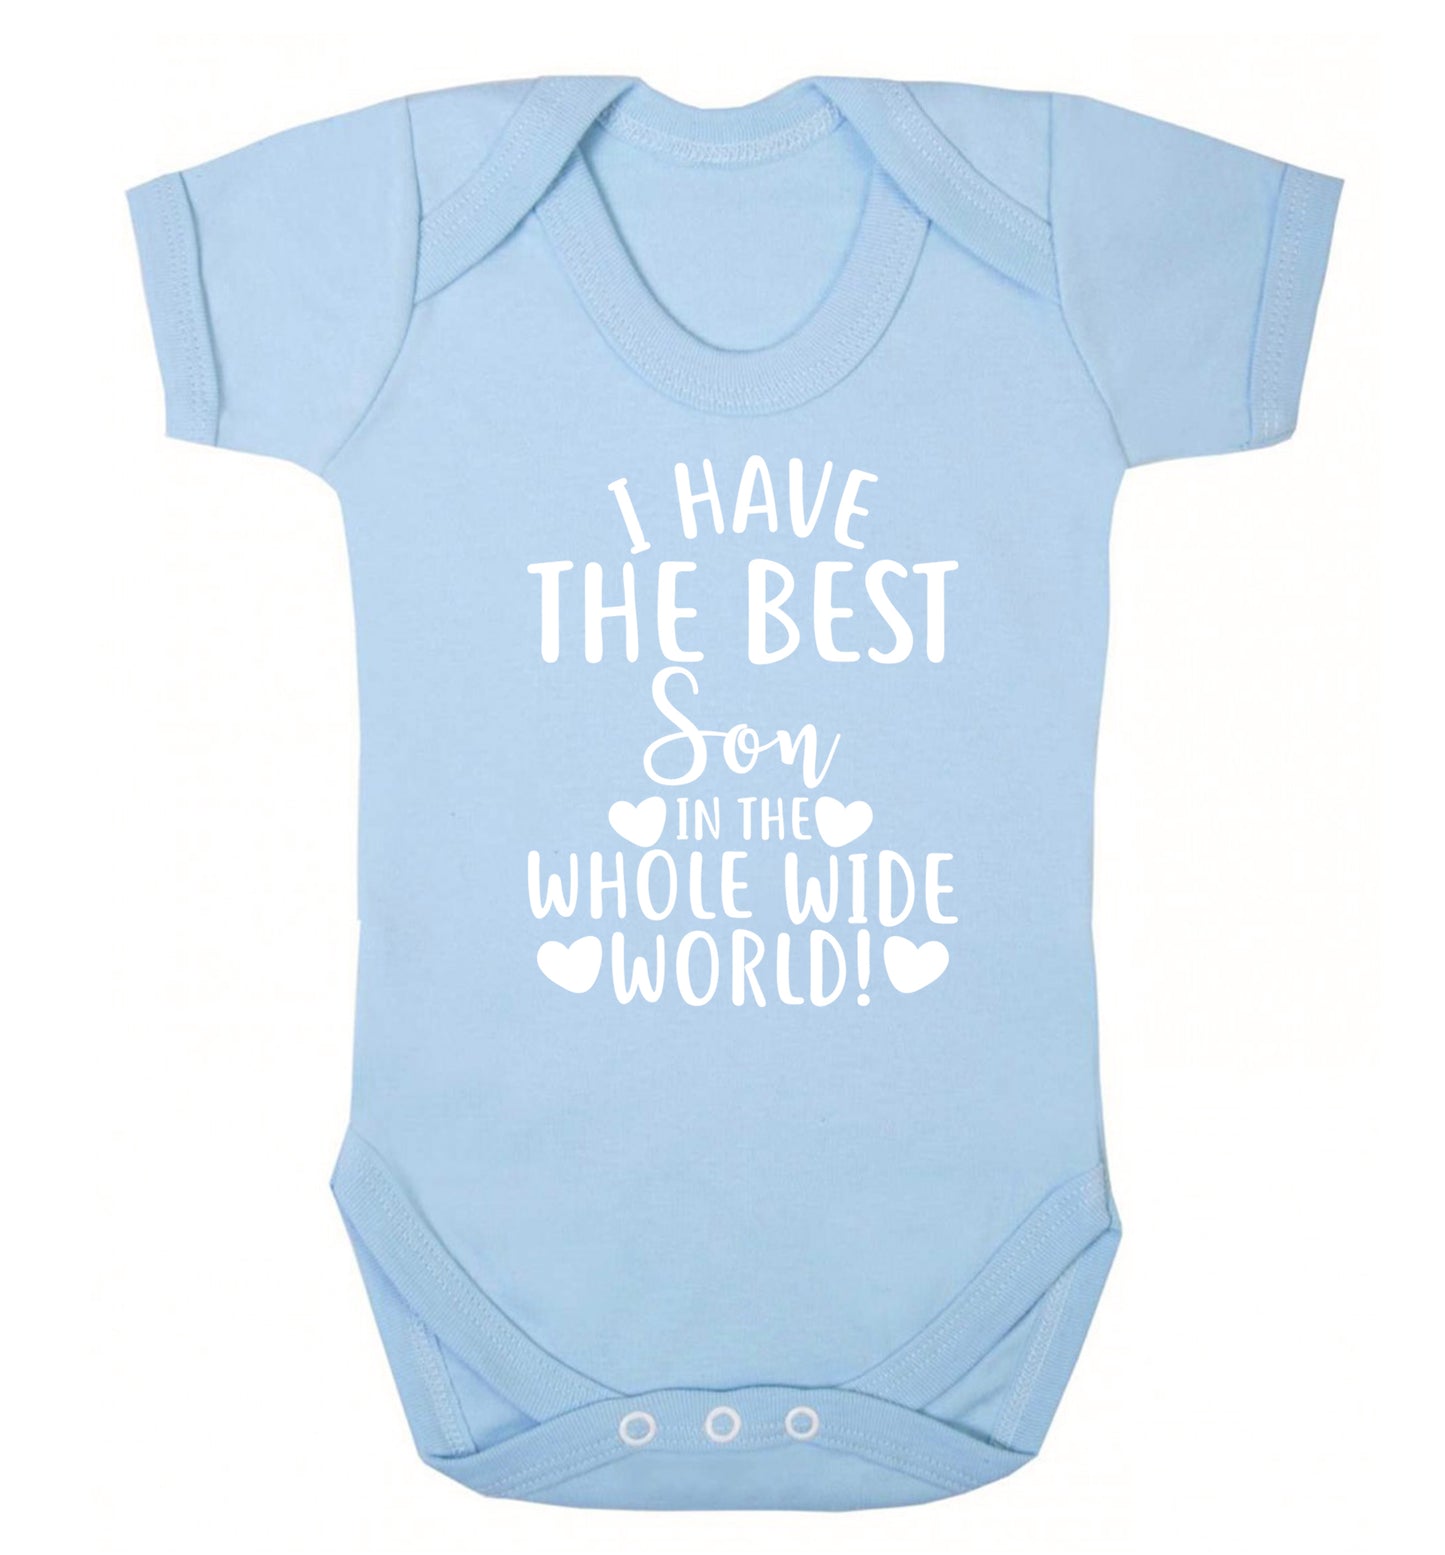 I have the best son in the whole wide world! Baby Vest pale blue 18-24 months